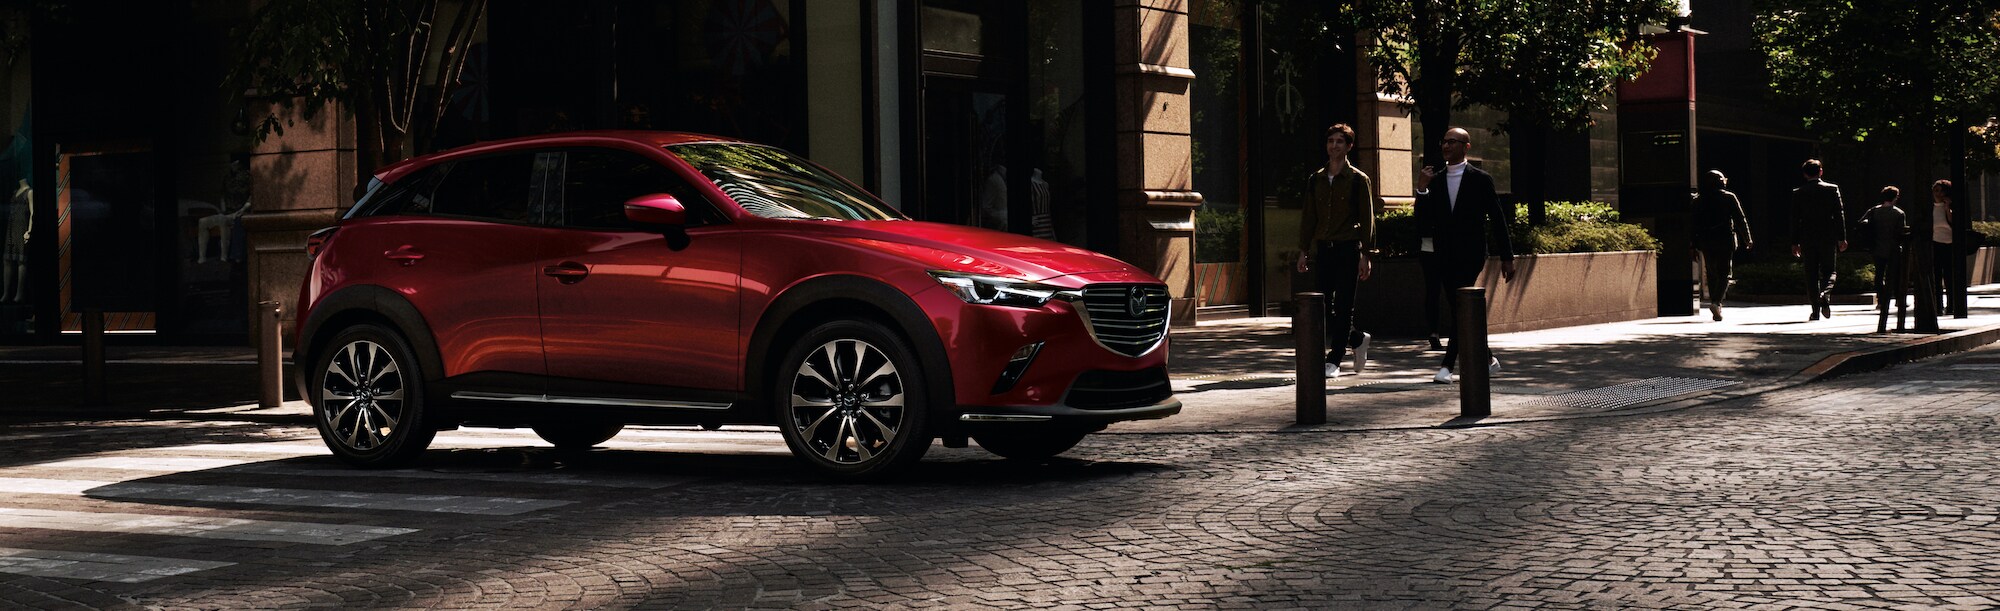 Mazda of New Bern is a car dealership near Pine Knoll Shores NC | Red 2020 Mazda CX-5 parked on cobblestone road